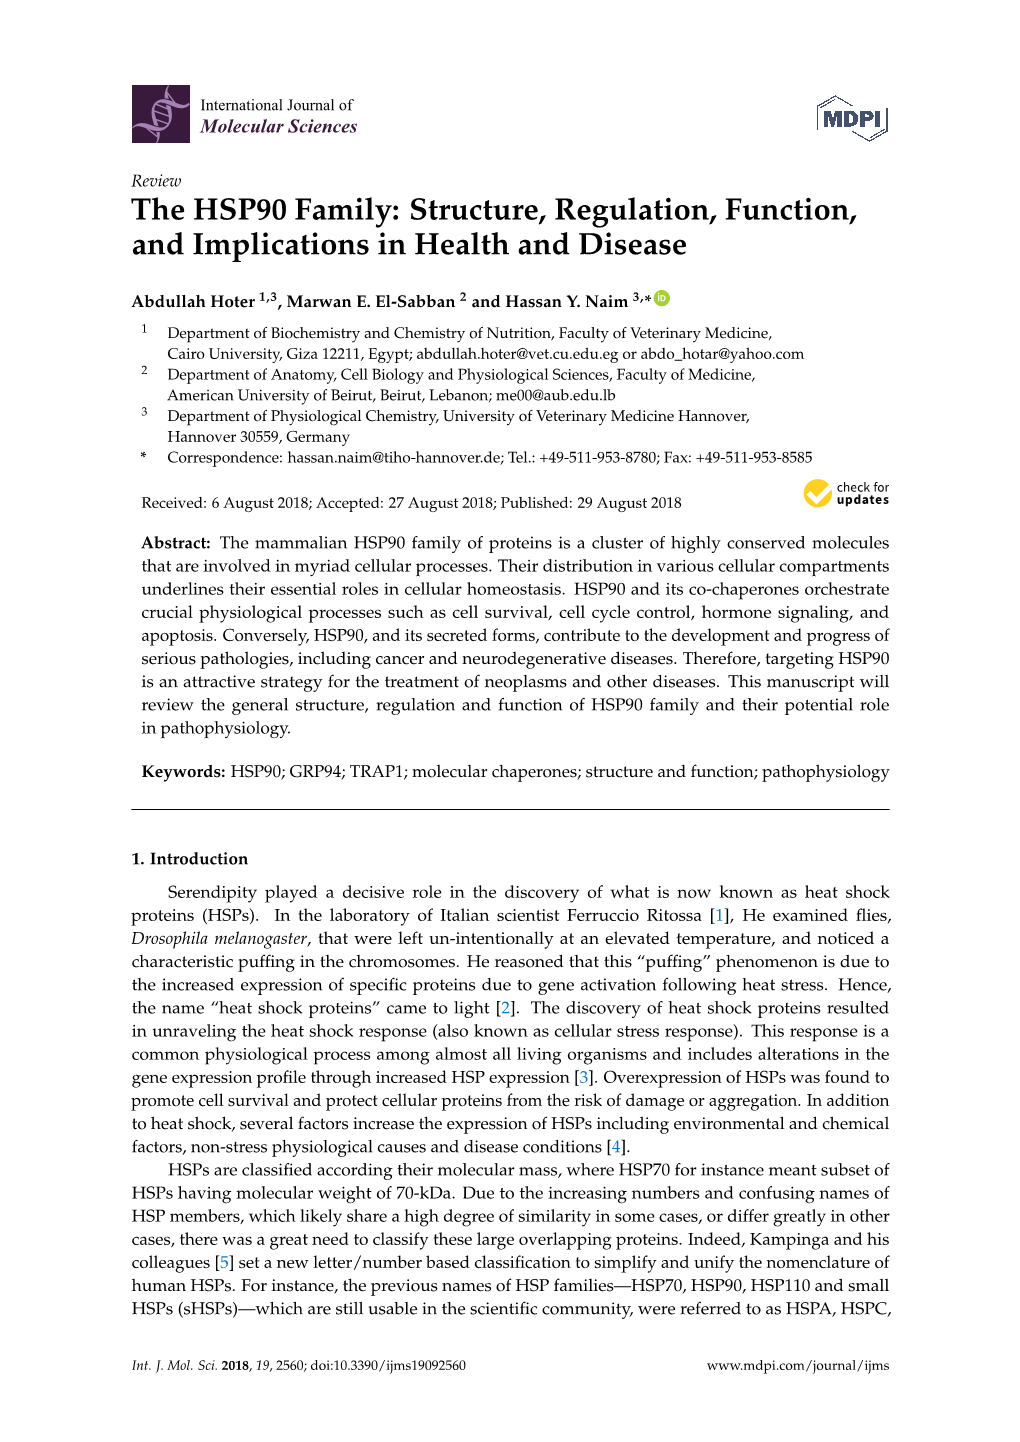 The HSP90 Family: Structure, Regulation, Function, and Implications in Health and Disease